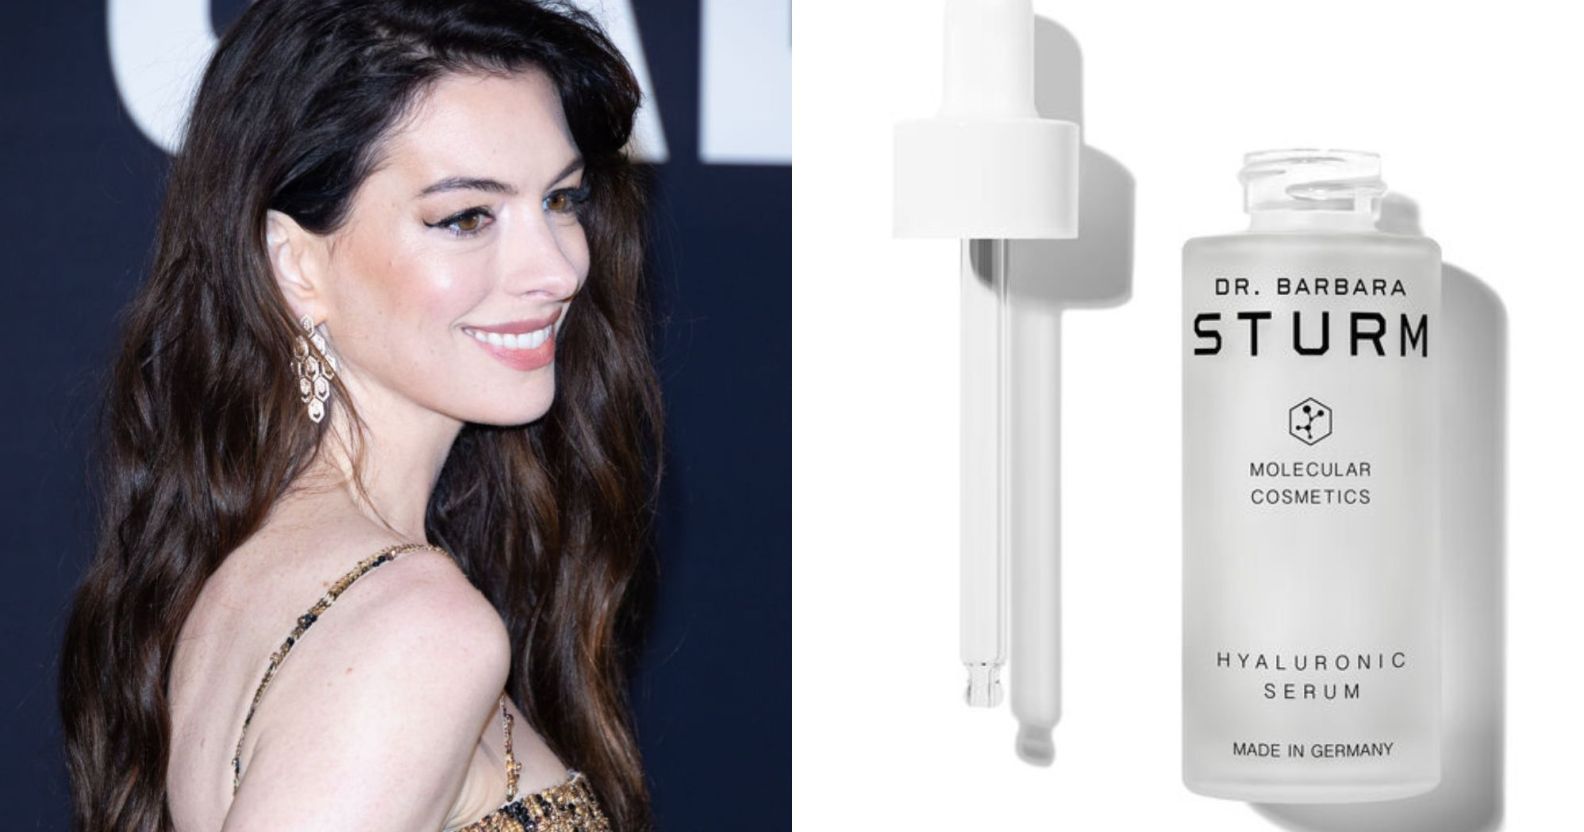 Anne Hathaway fans wants to know all the details of her skincare routine